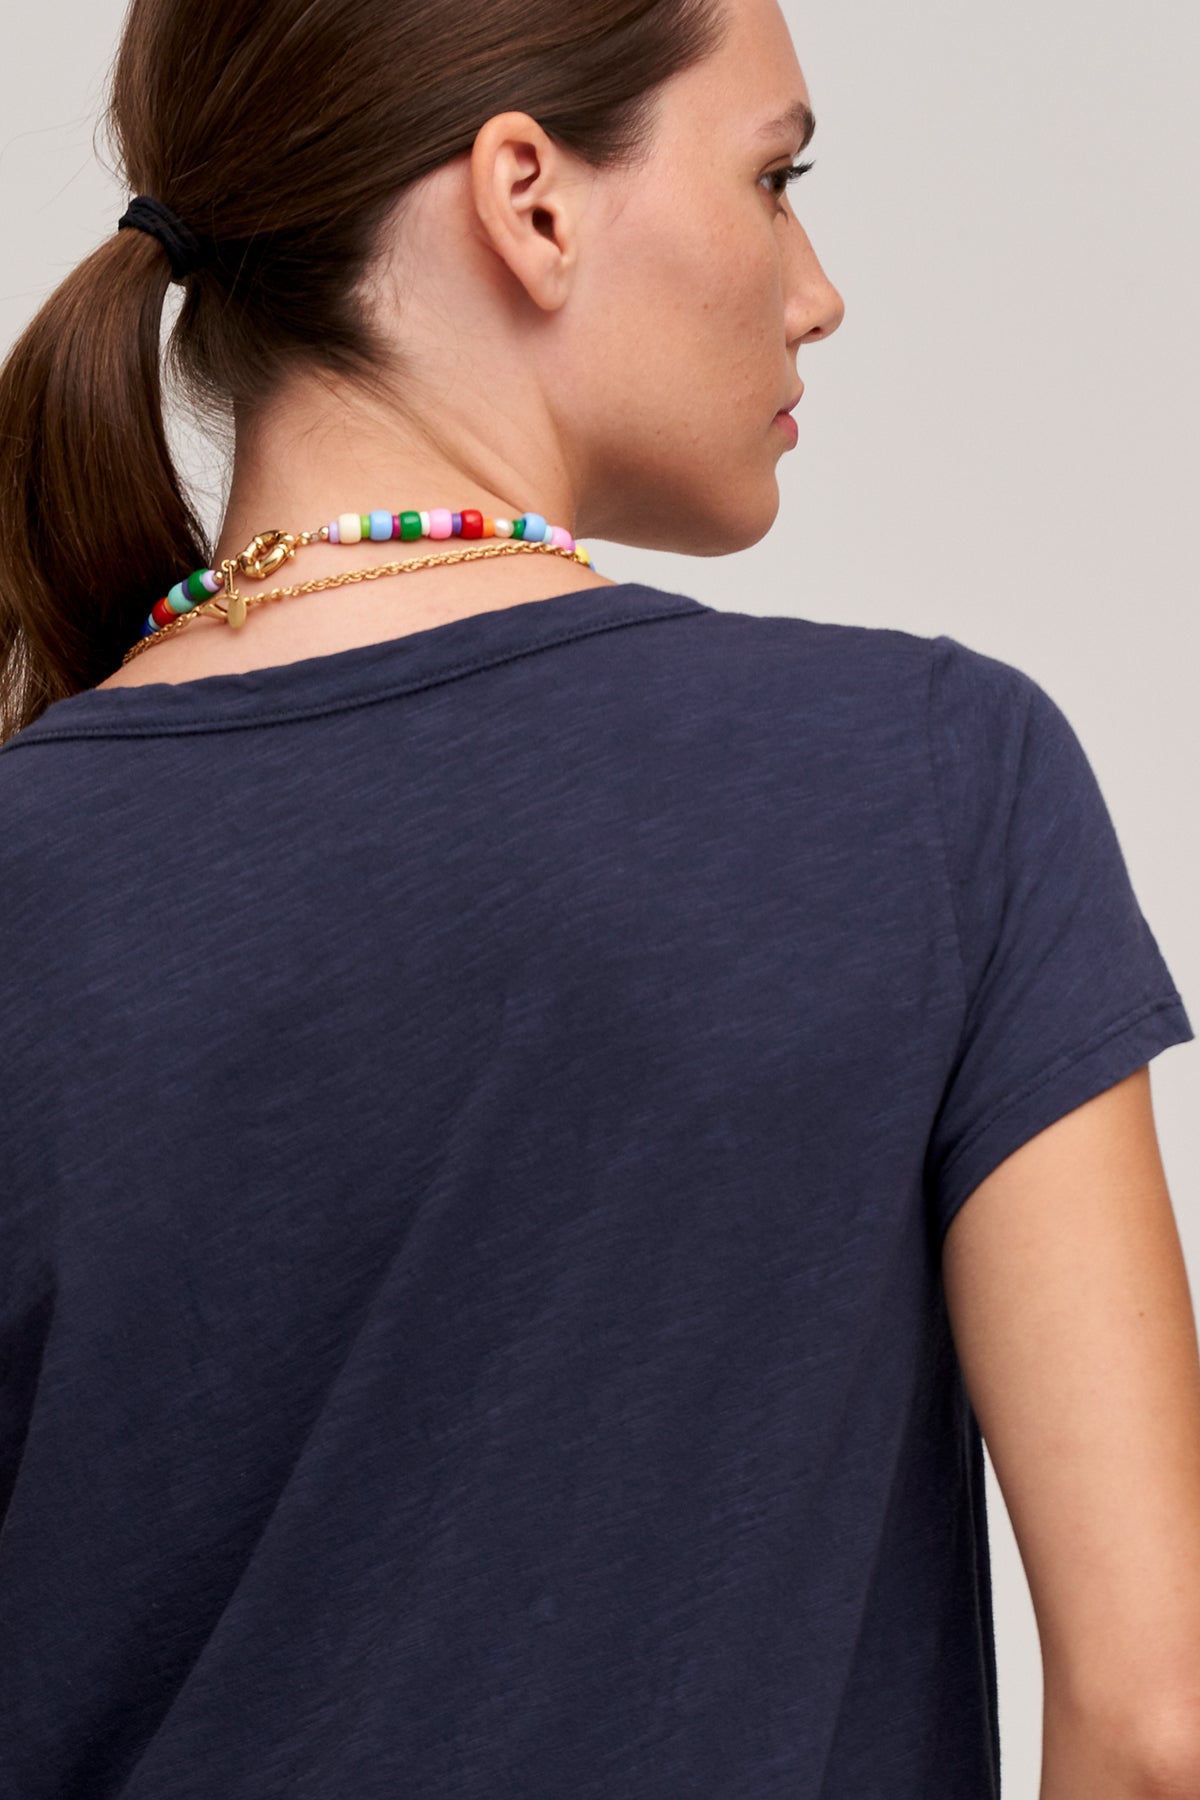 The back view of a woman wearing a TILLY ORIGINAL SLUB CREW NECK TEE by Velvet by Graham & Spencer with colorful beads.-24532951695553